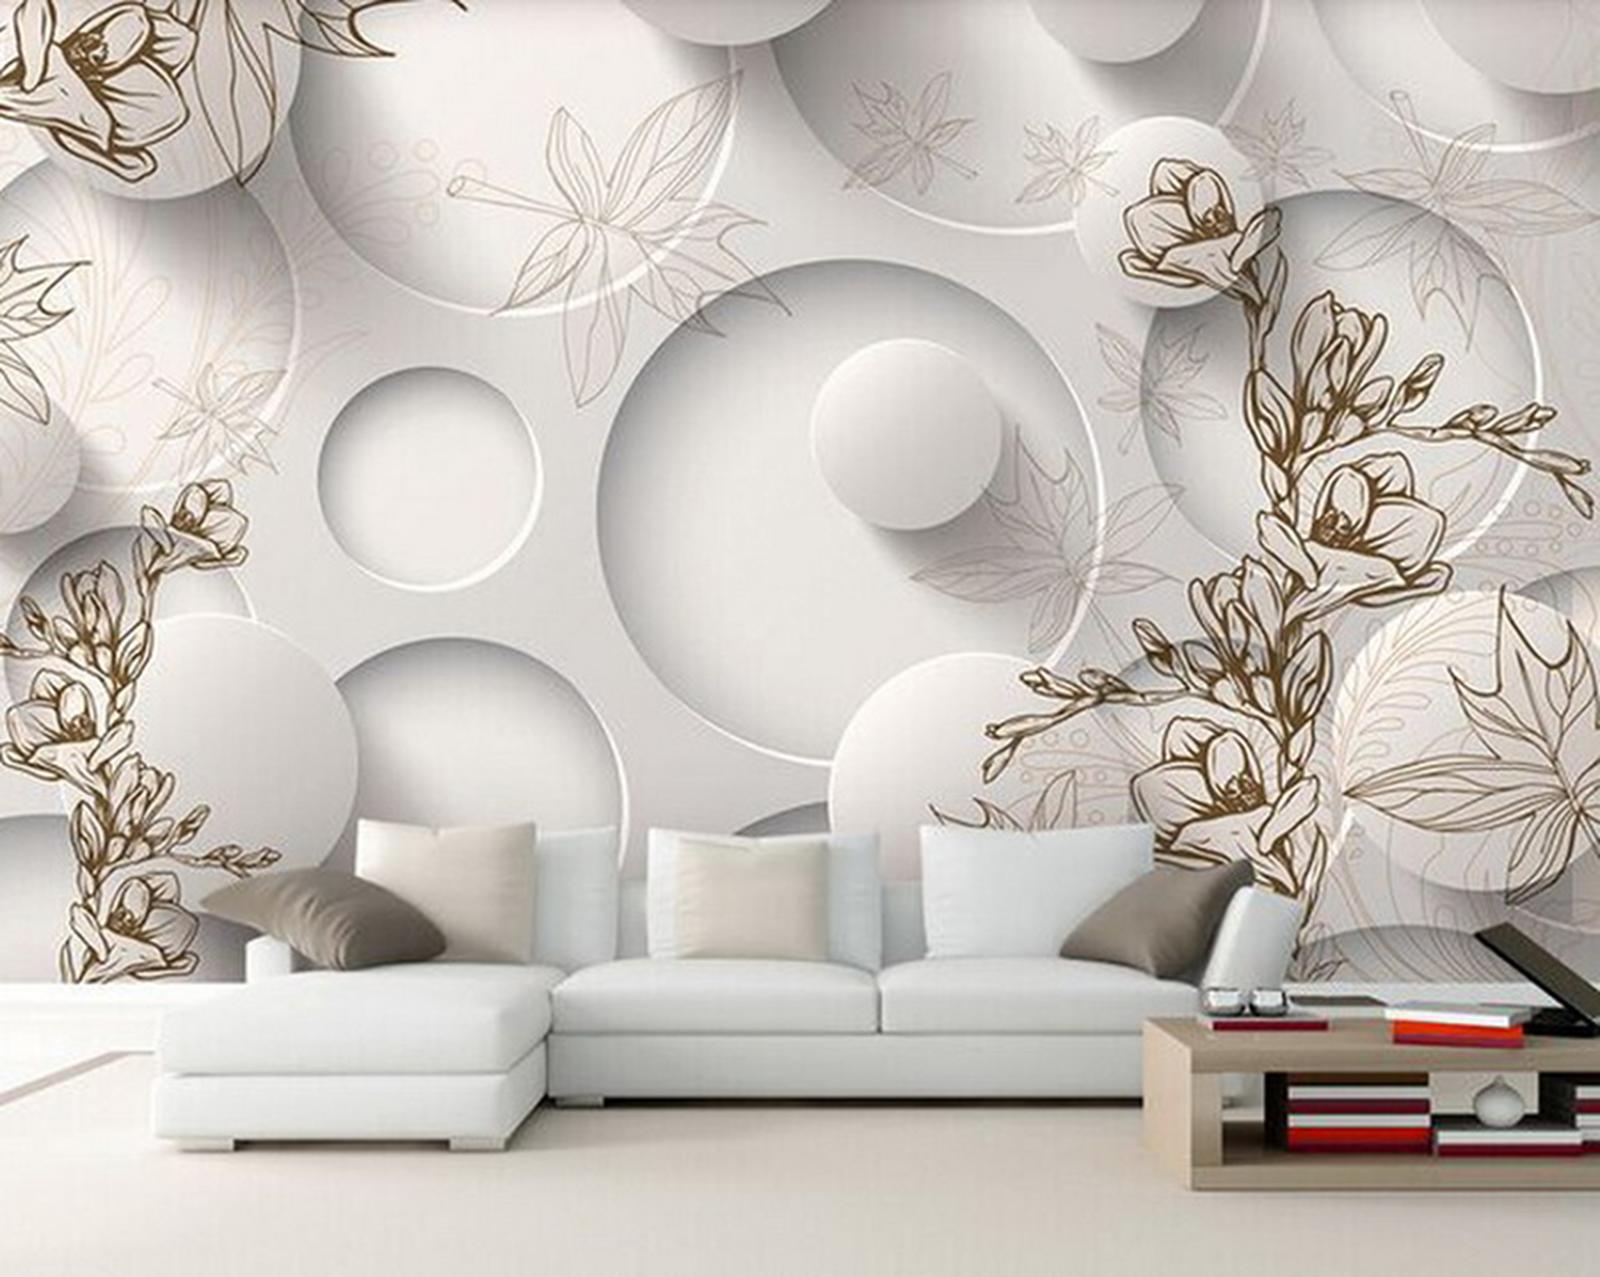 Modern 3D Wallpaper Design Ideas That Looks Absolute Real | Engineering